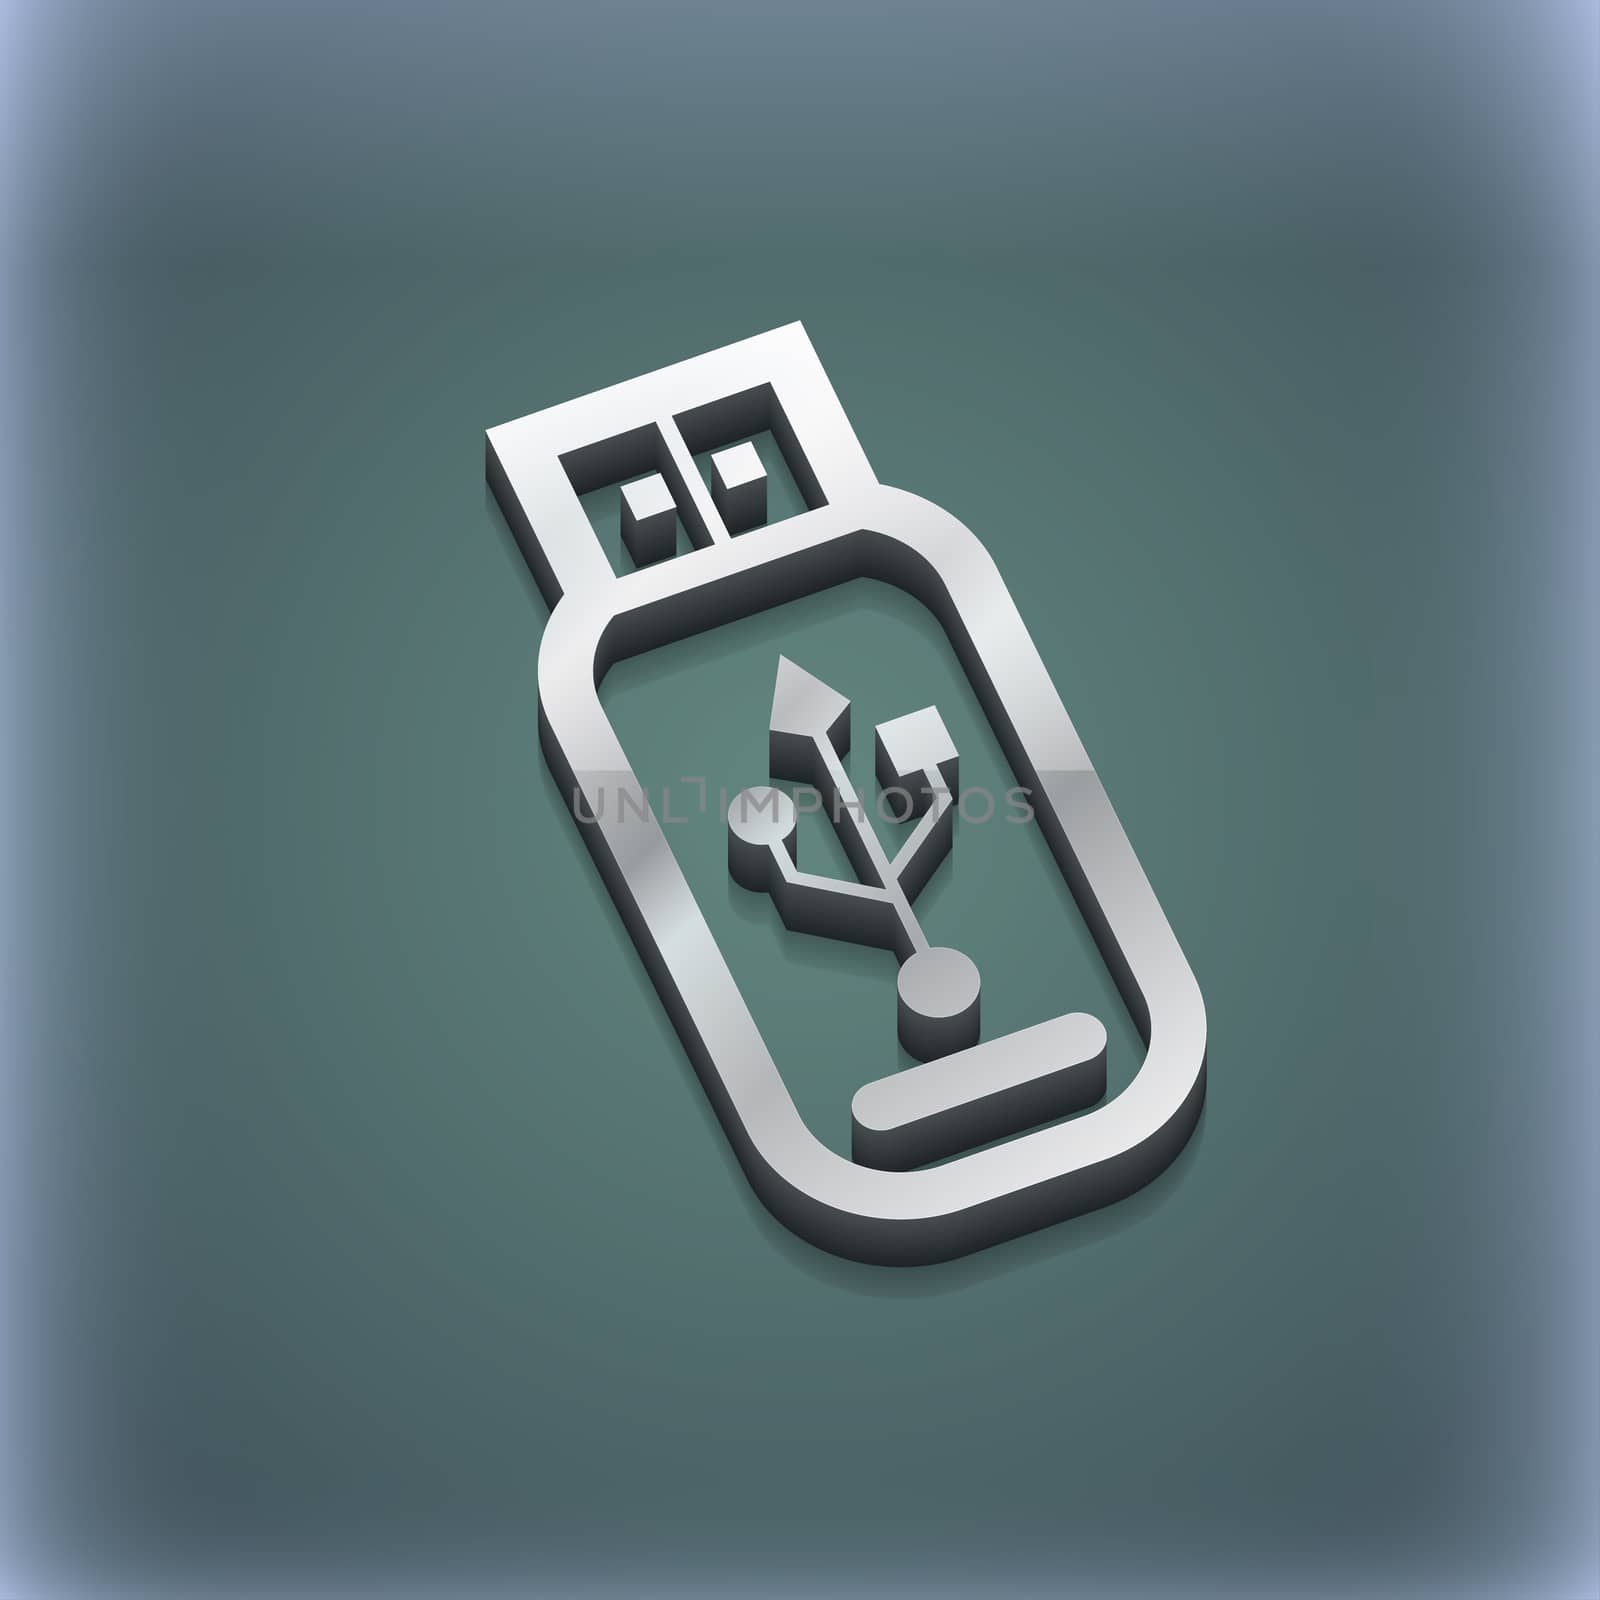 Usb flash drive icon symbol. 3D style. Trendy, modern design with space for your text illustration. Raster version